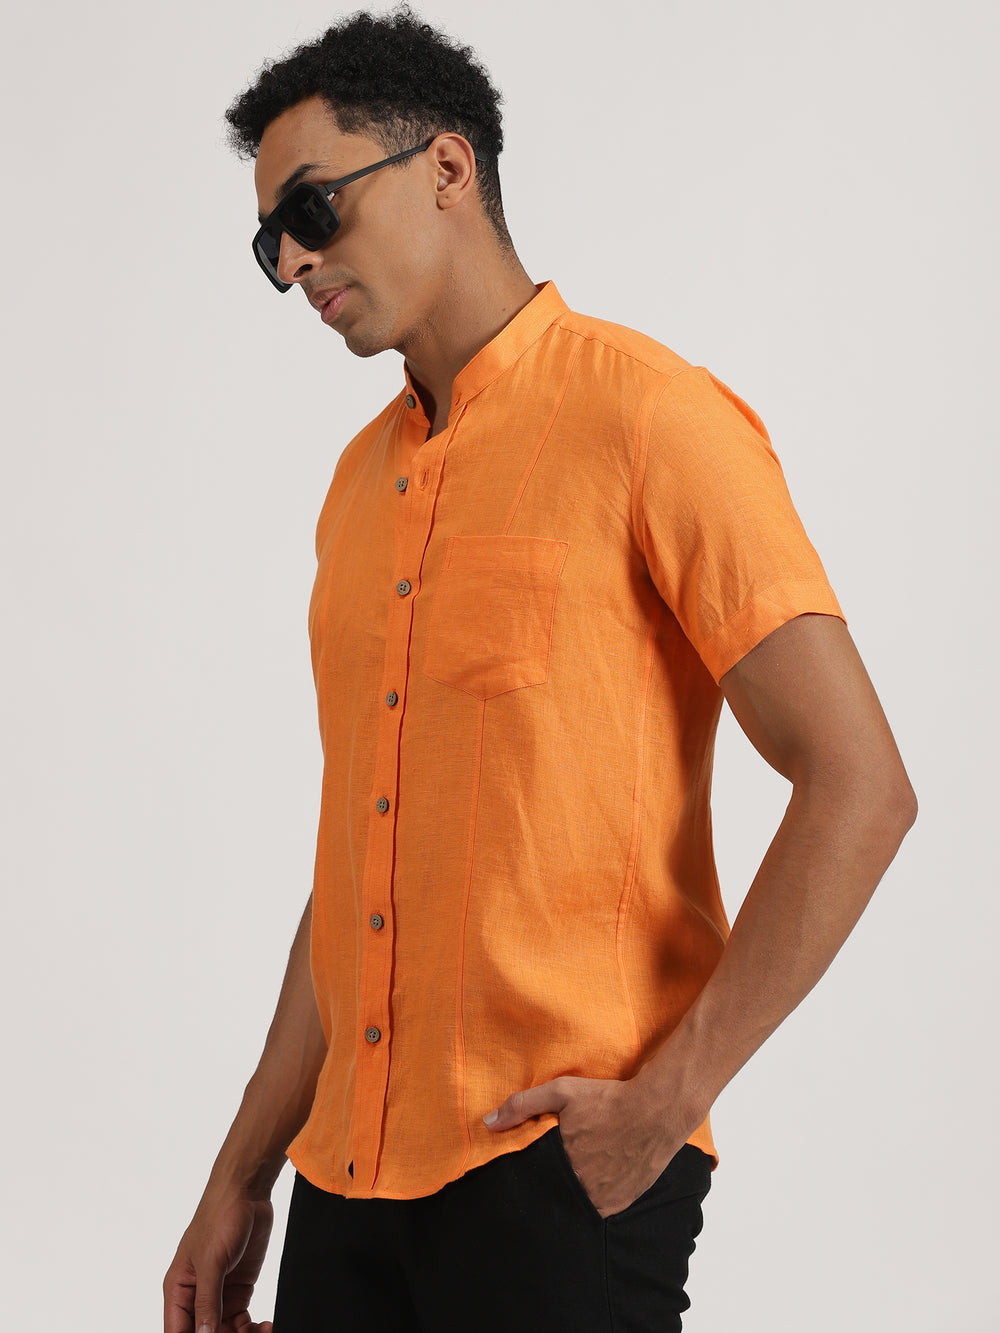 Tangy Brew Look | Trevor Beer Orange Shirt & Pure White Trousers